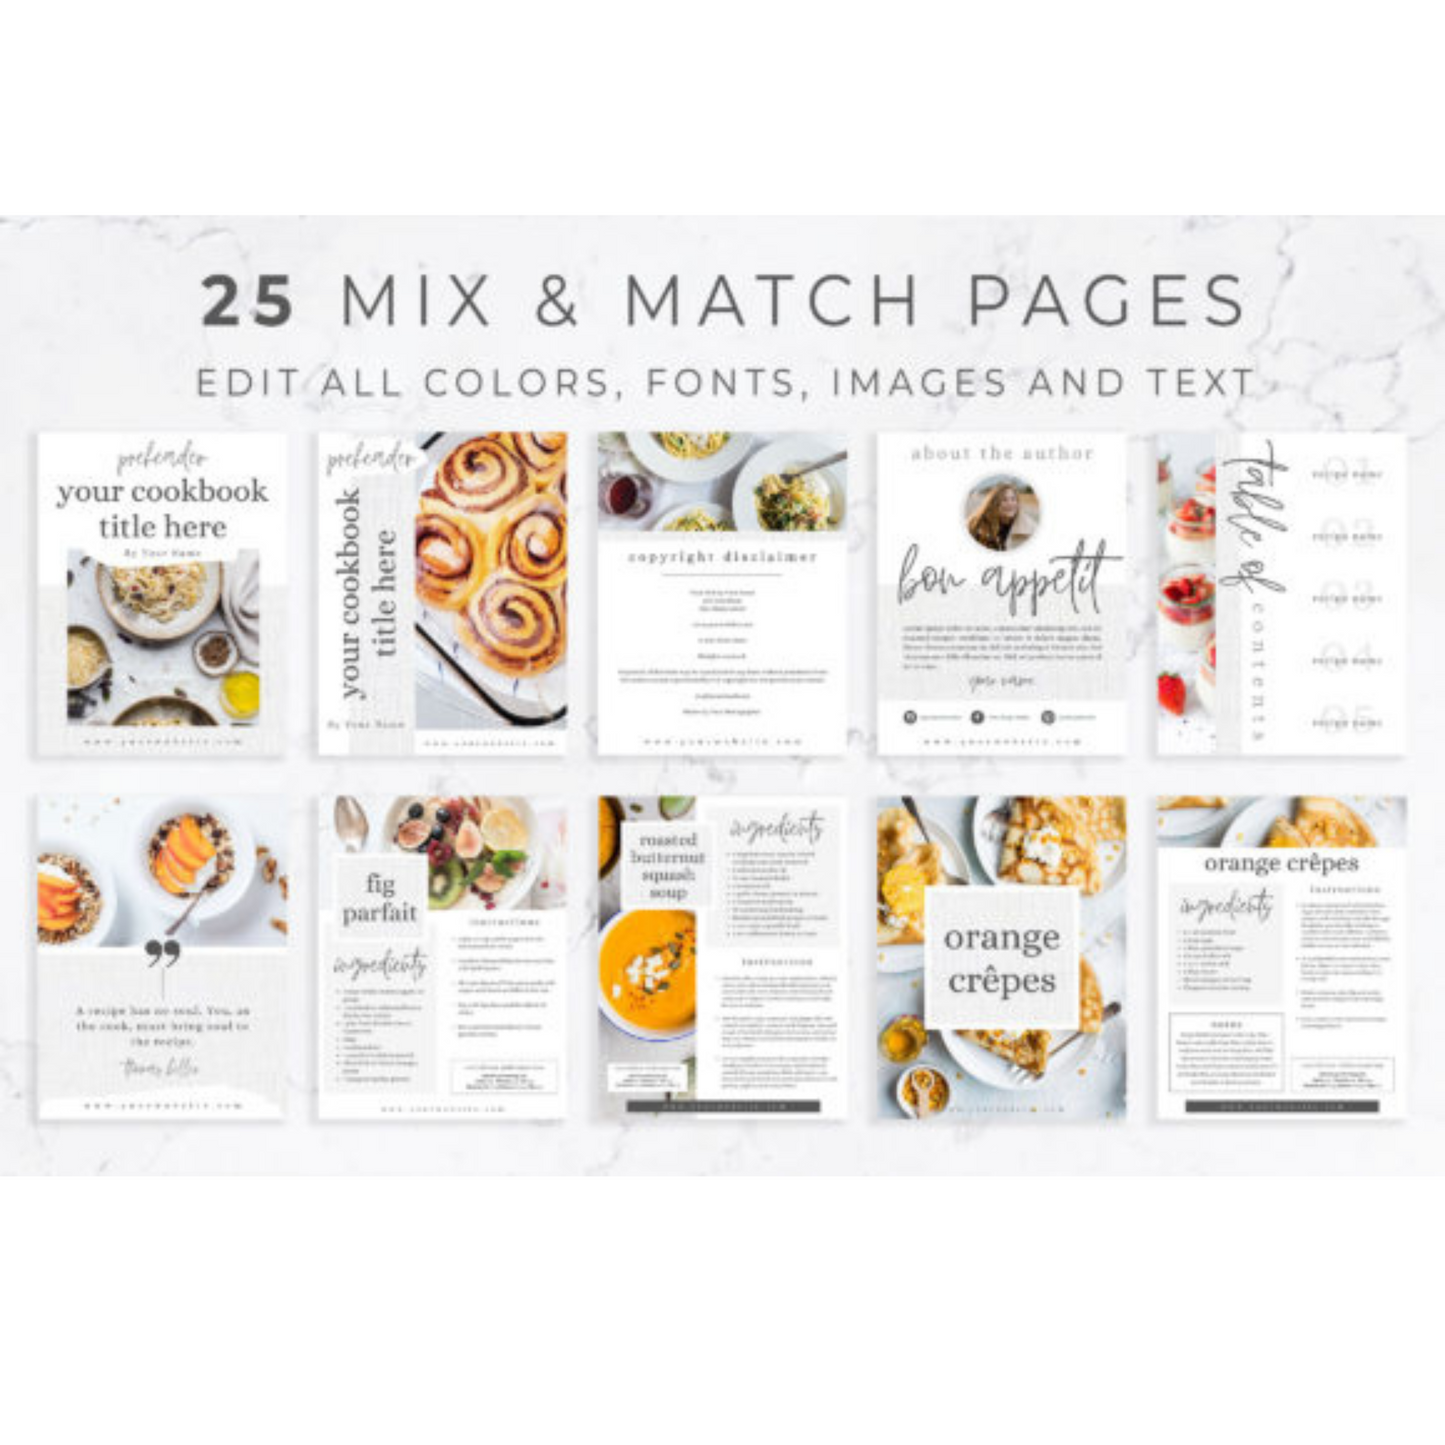 Recipe eBook Template for Canva, Delicious Meals in 25 pages